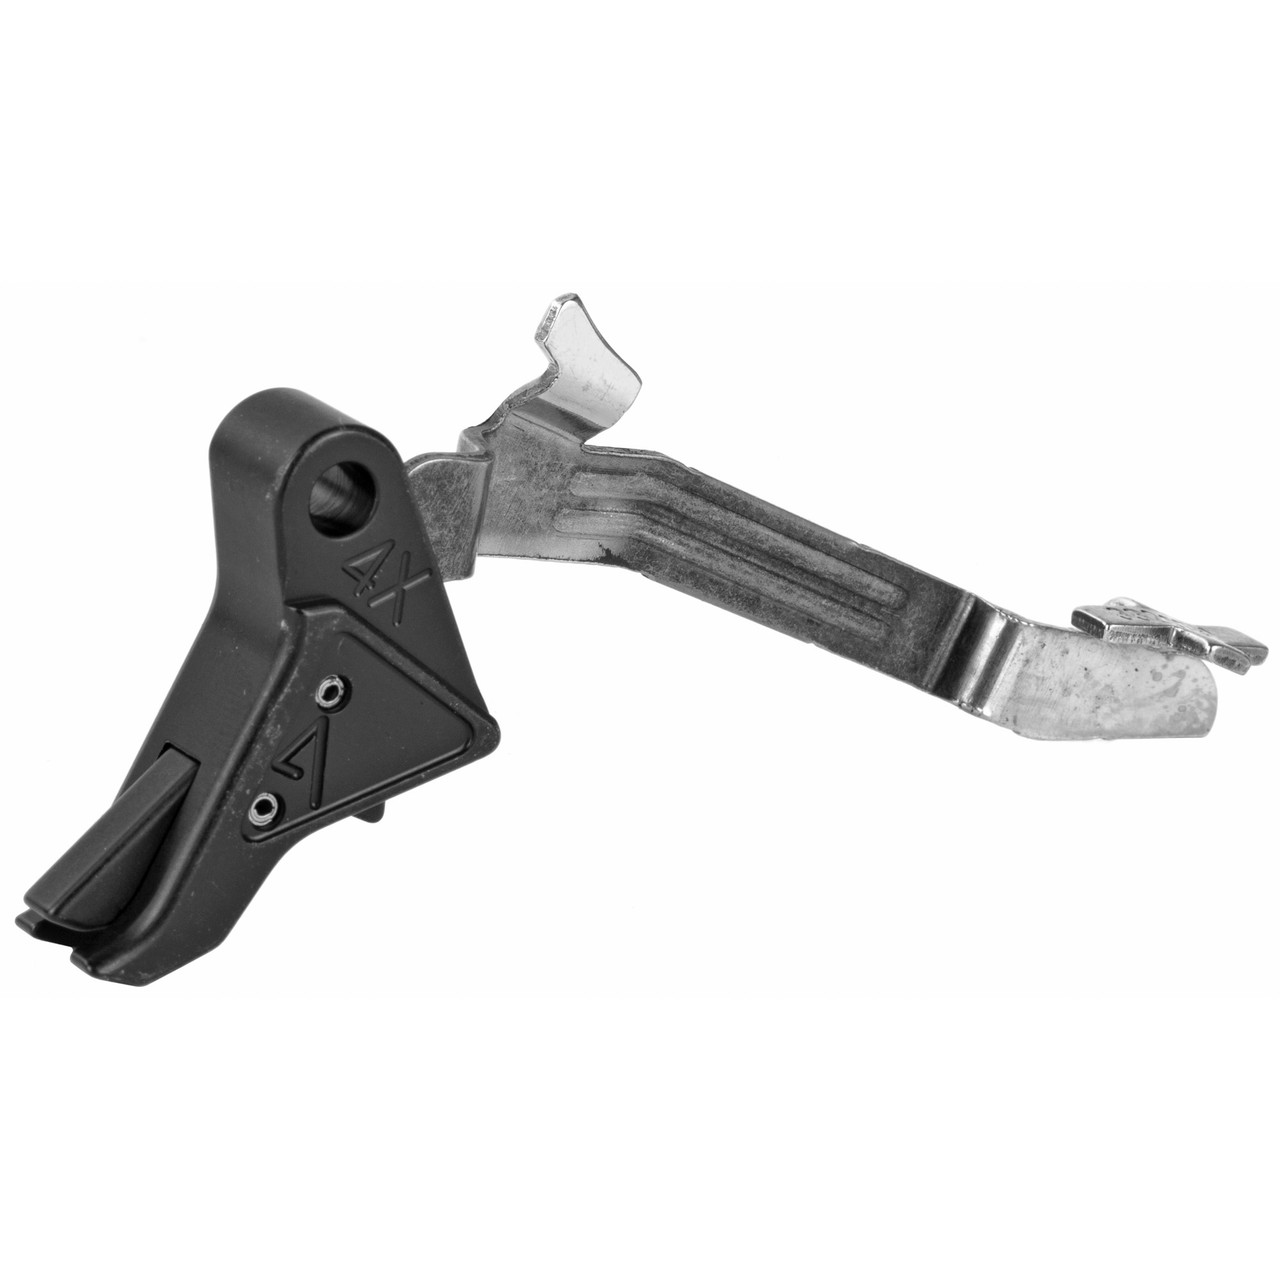 Agency Arms DIT2-42-B Drop-in Trigger For G42 Blk